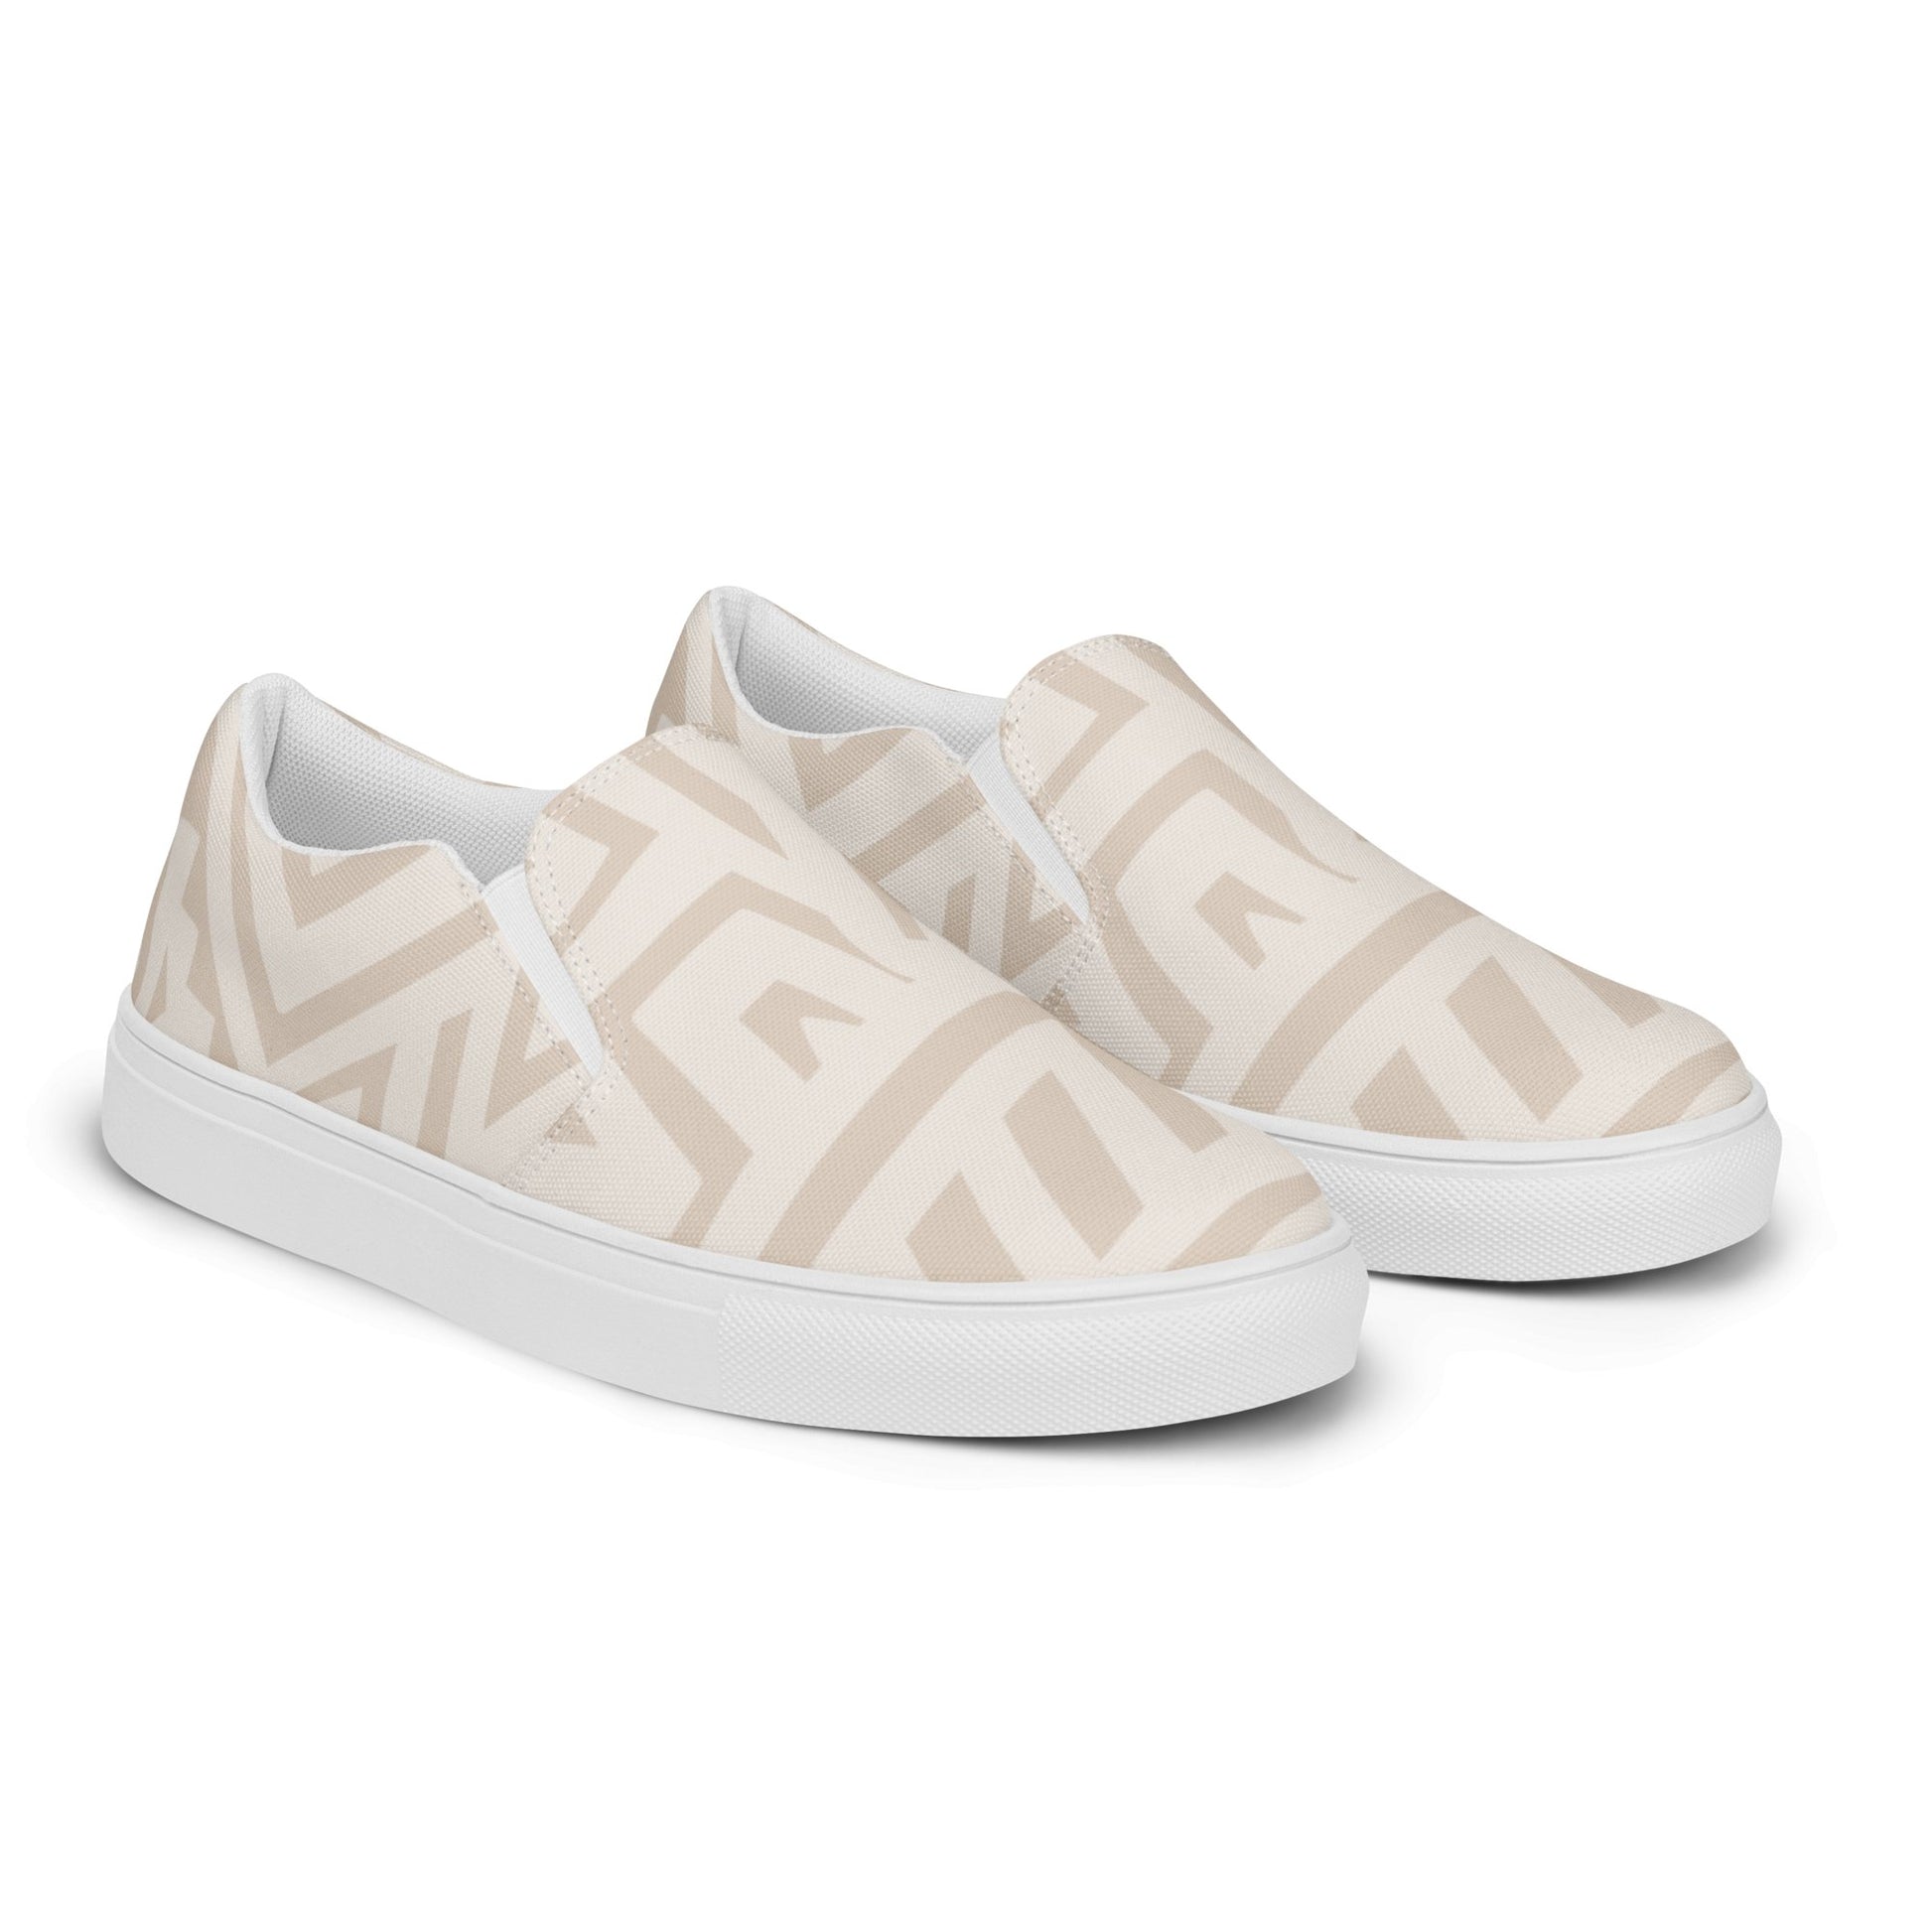 Abstract Ethnic Style - Women’s Slip-on Canvas Shoes - Bonotee